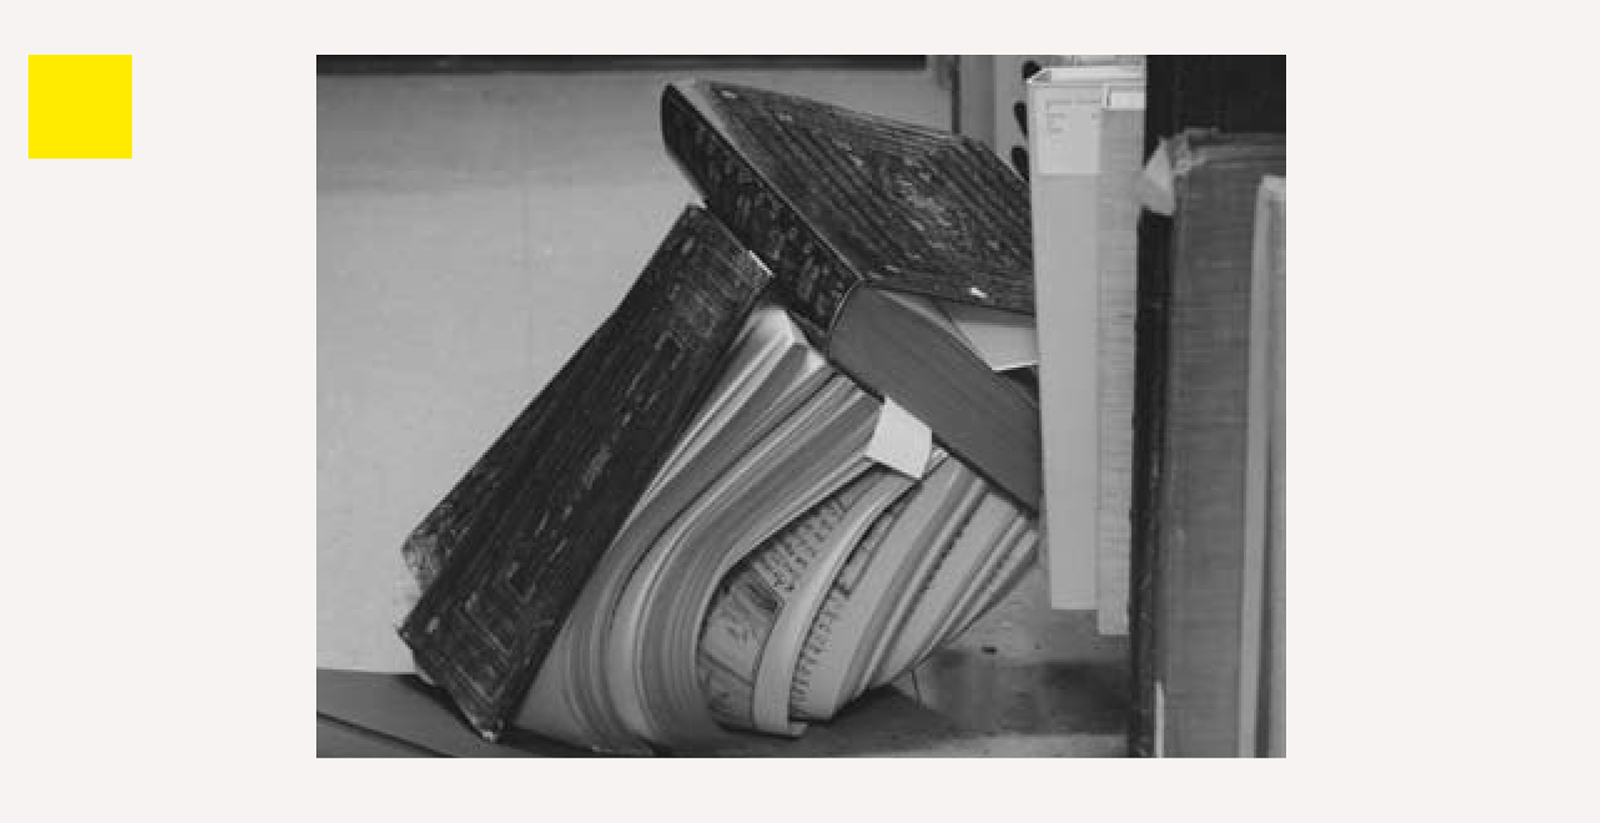 A photograph of toppled books at the University of California Riverside Library in the aftermath of an earthquake on 28 June 1992.